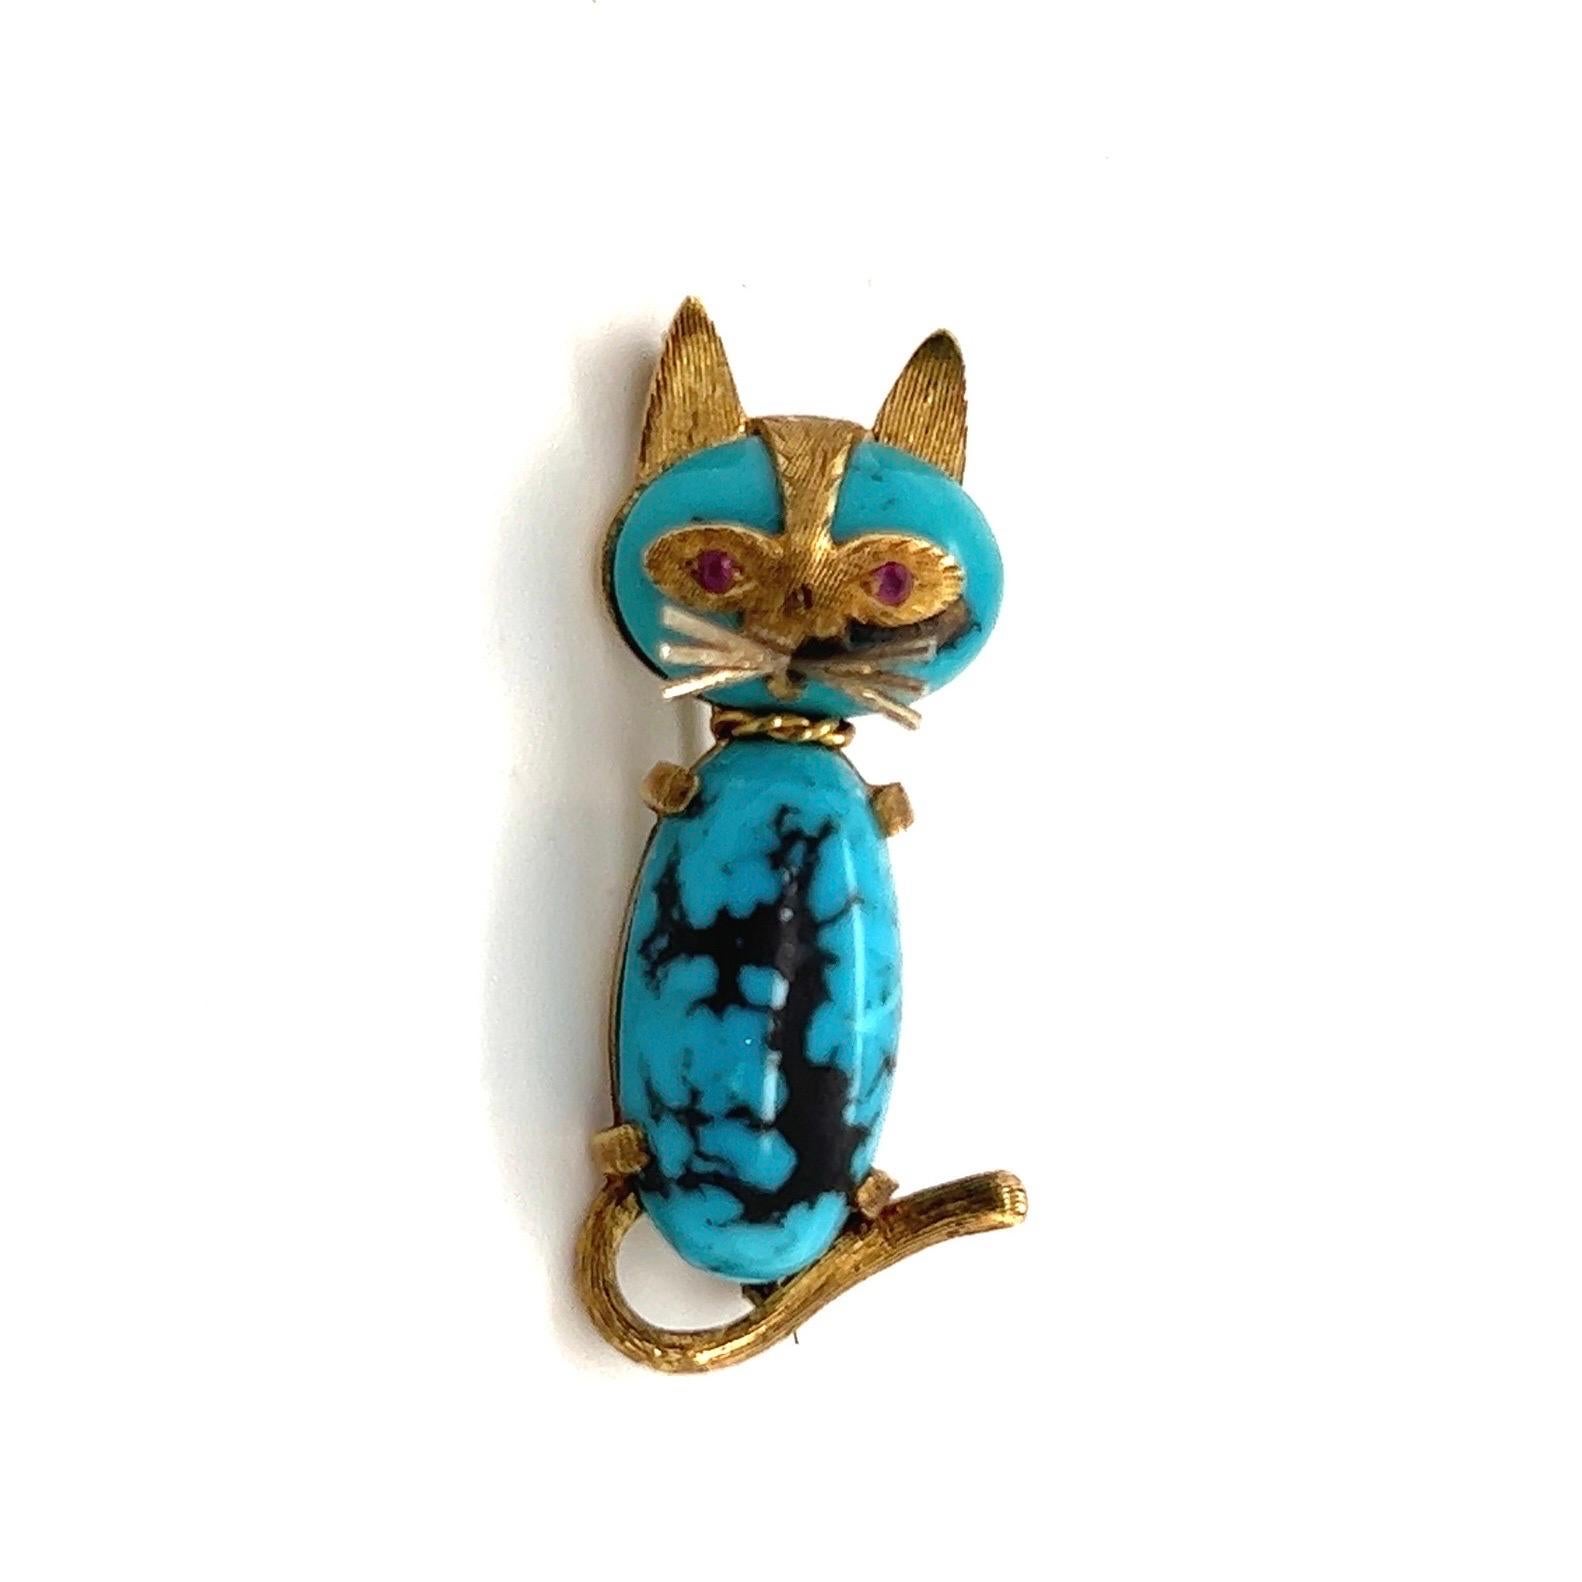 Absolutely adorable 18 karat gold, turquoise and ruby cat pin brooch by the house of Cartier, circa 1960s.

Crafted in 18 karat satin finish yellow gold, depicting a whimsical cat whose head and body consist in two turquoise cabochons. The eyes are